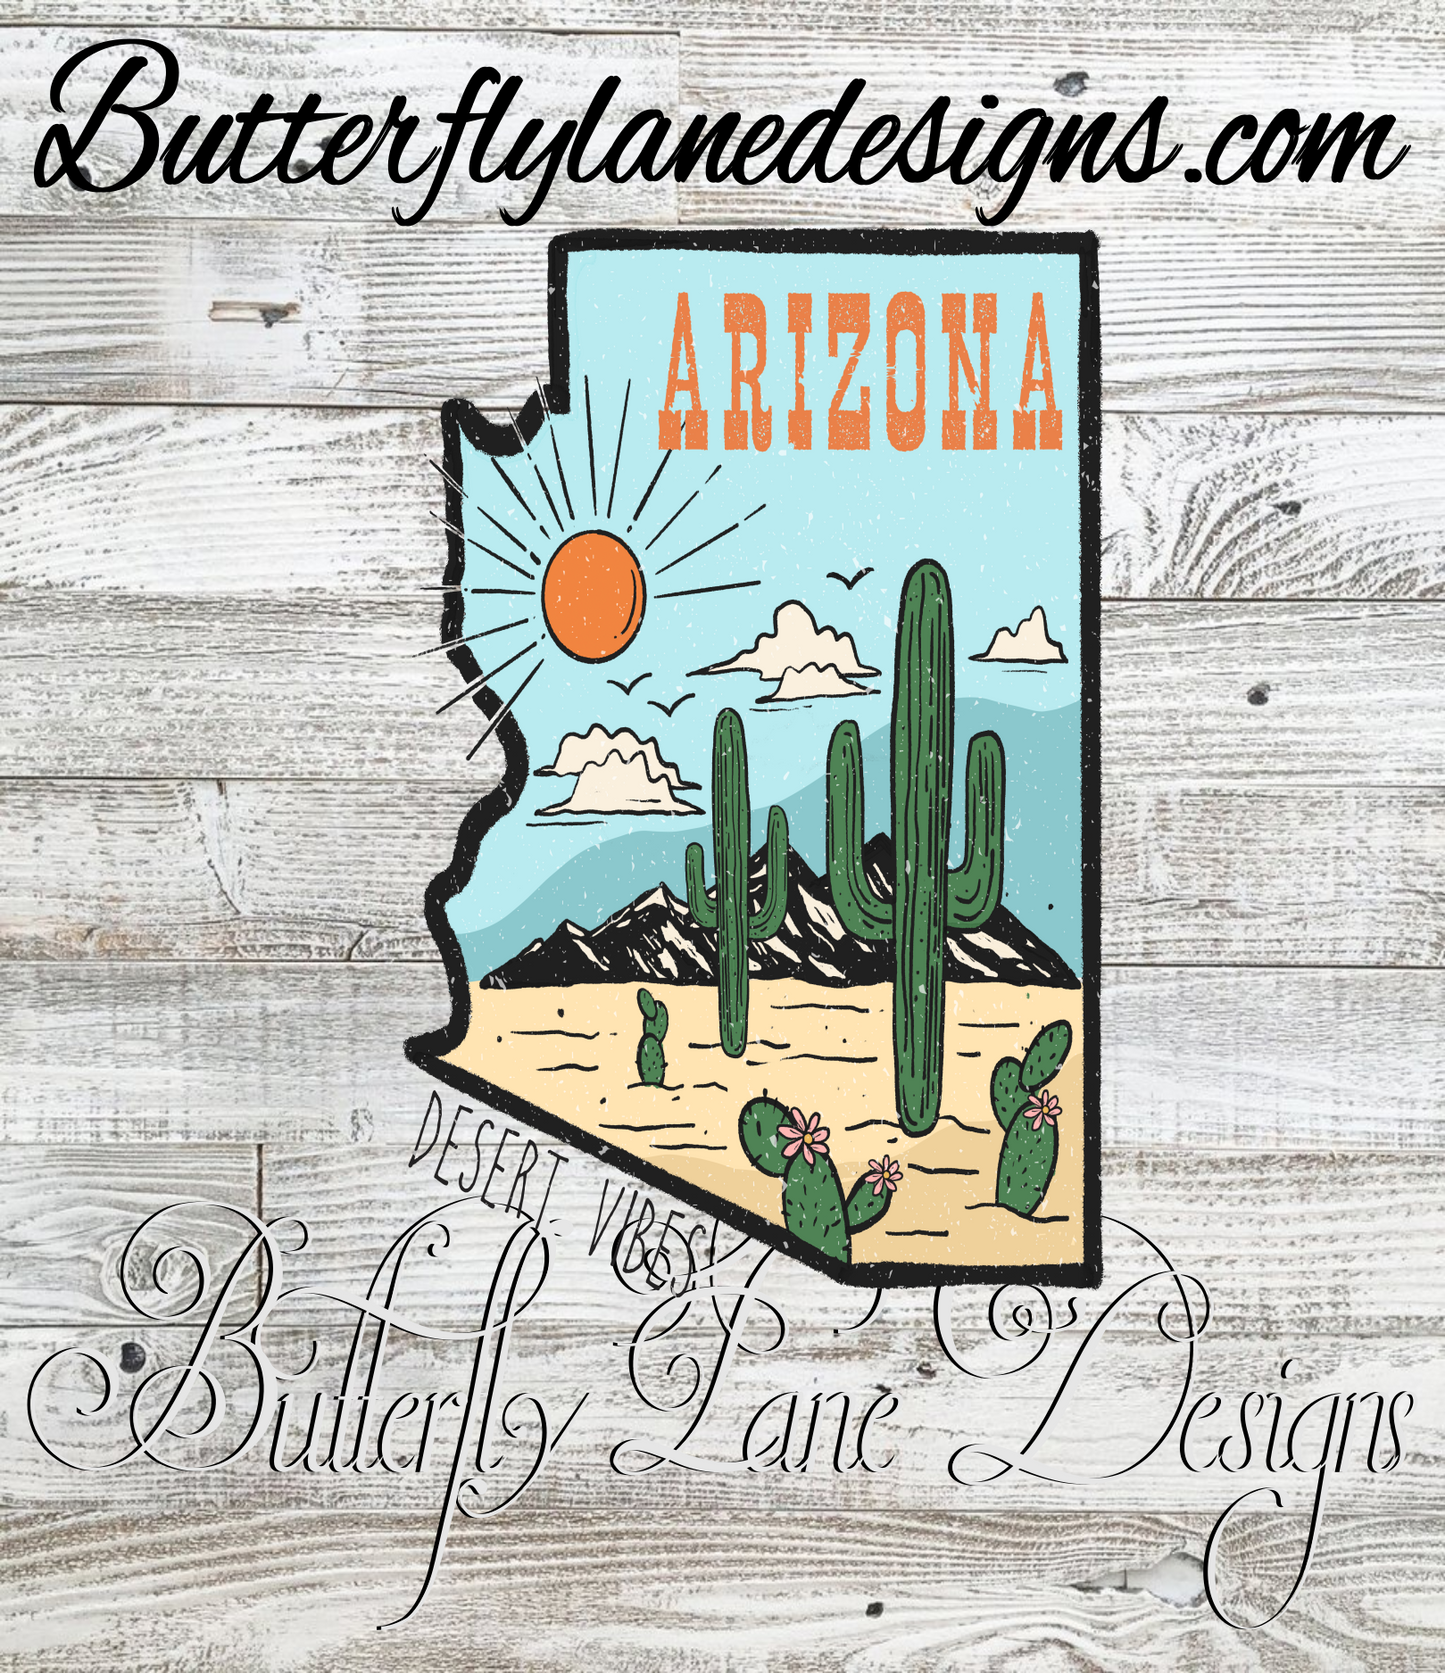 Arizona-desert vibes-retro style :: Clear Decal or VCD